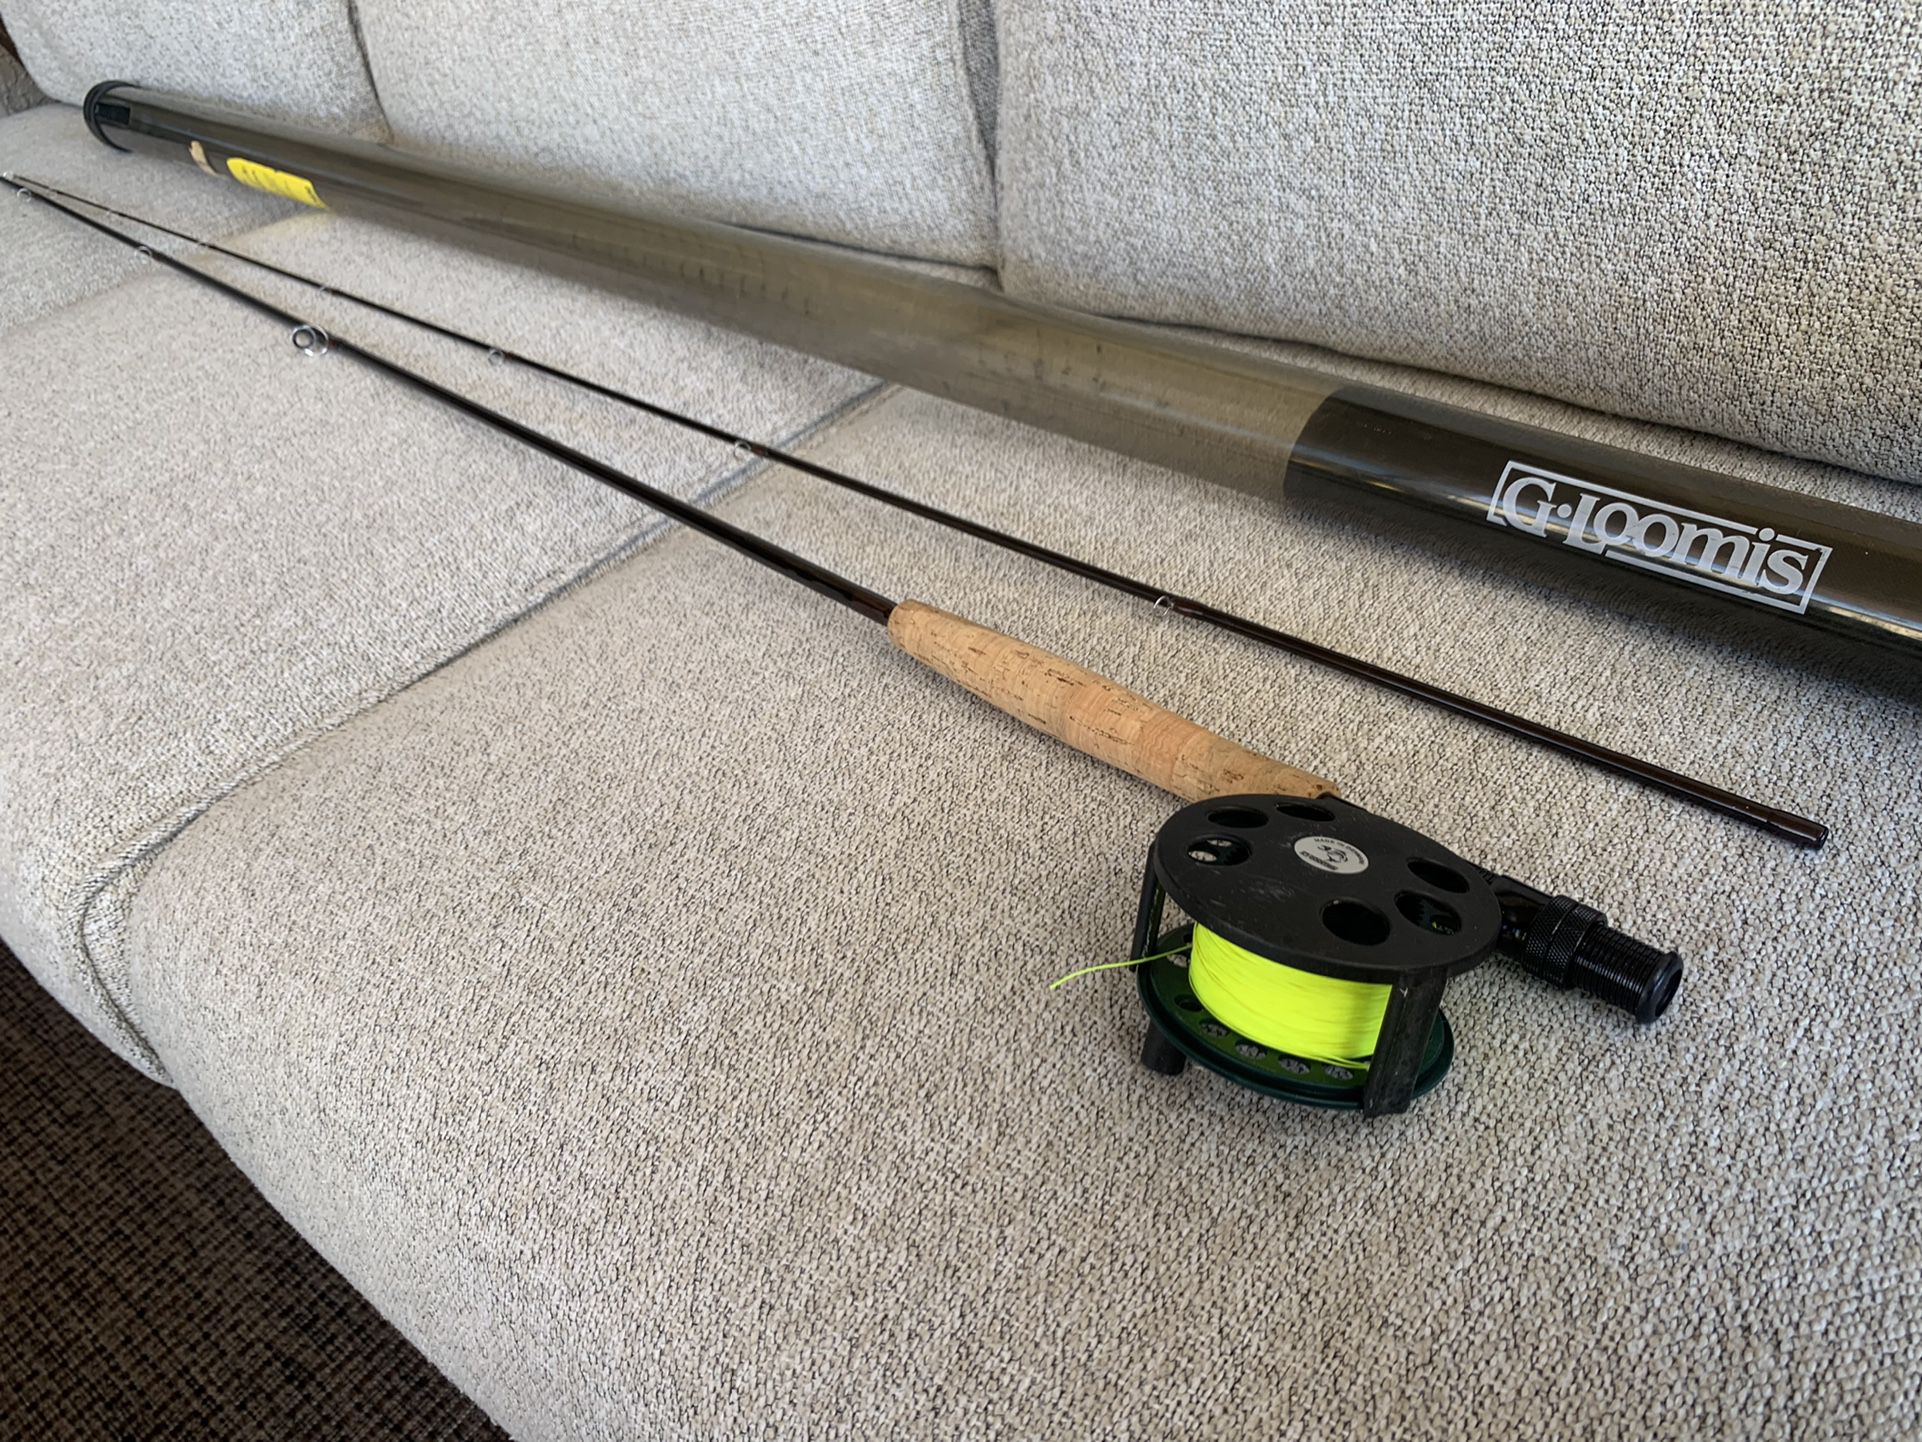 G-Loomis Fly Rod Rainbrook 9 to 6# Reel and case